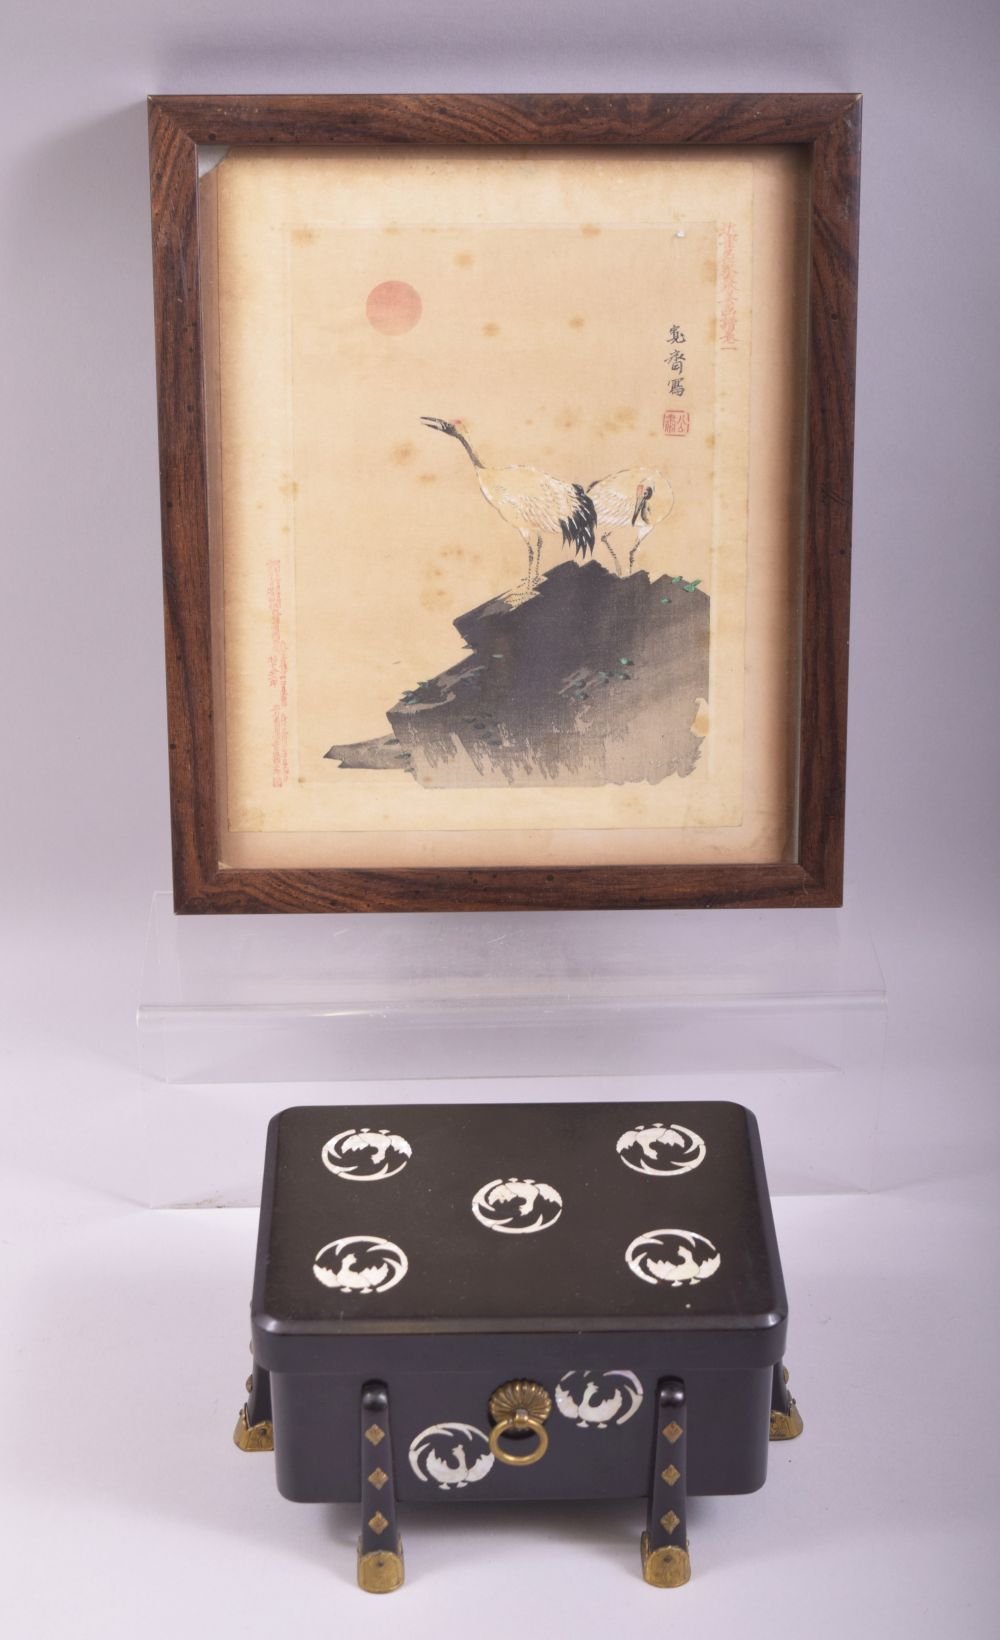 A JAPANESE BLACK LACQUER AND MOTHER OF PEARL INLAID BOX AND COVER, supported on eight feet with